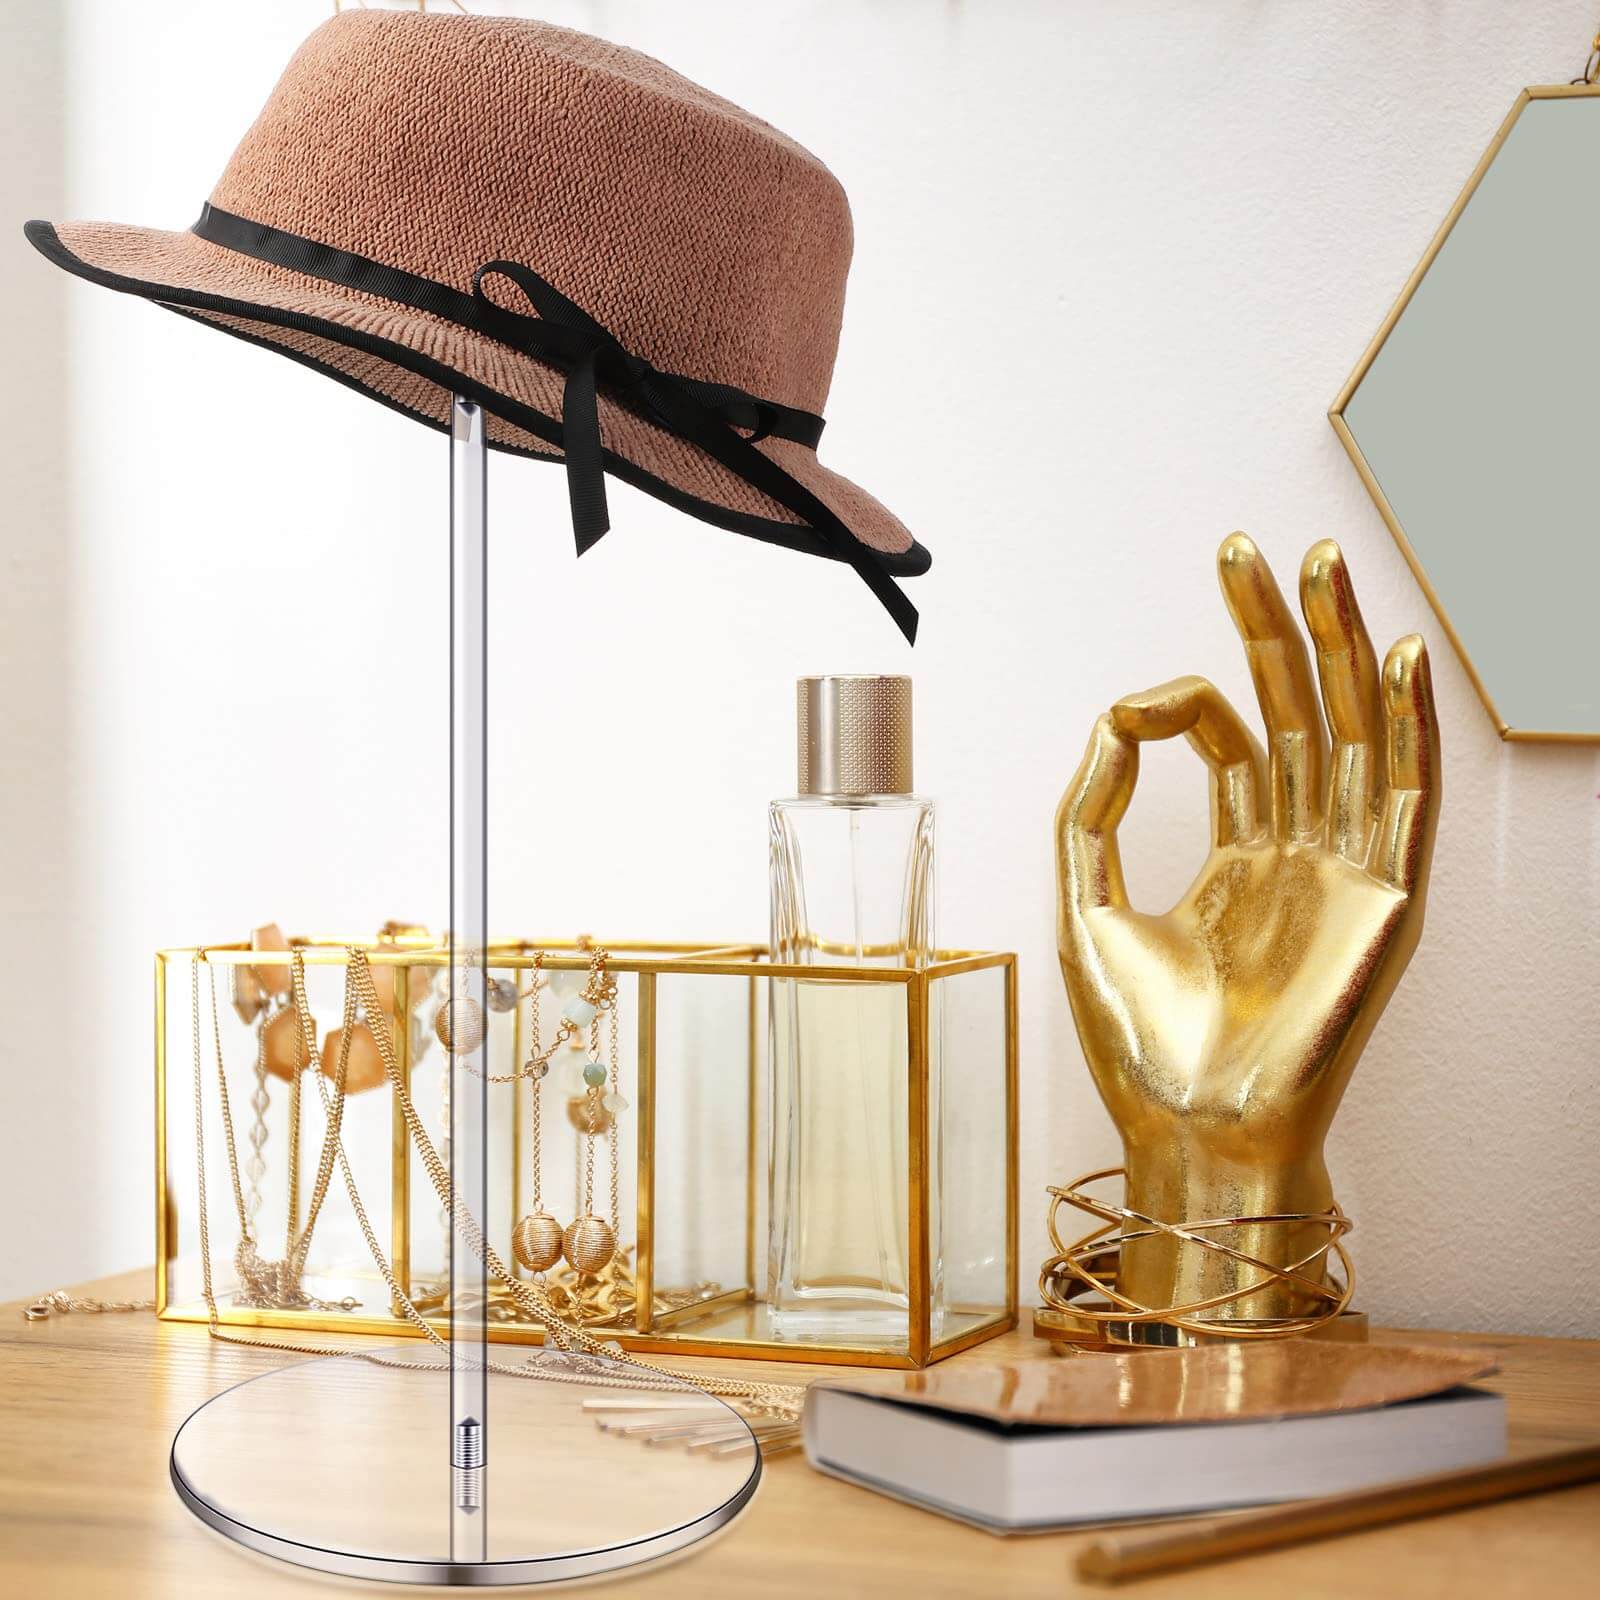 Hat Rack 24 Clear Store Display Your Baseball Cap Collection for